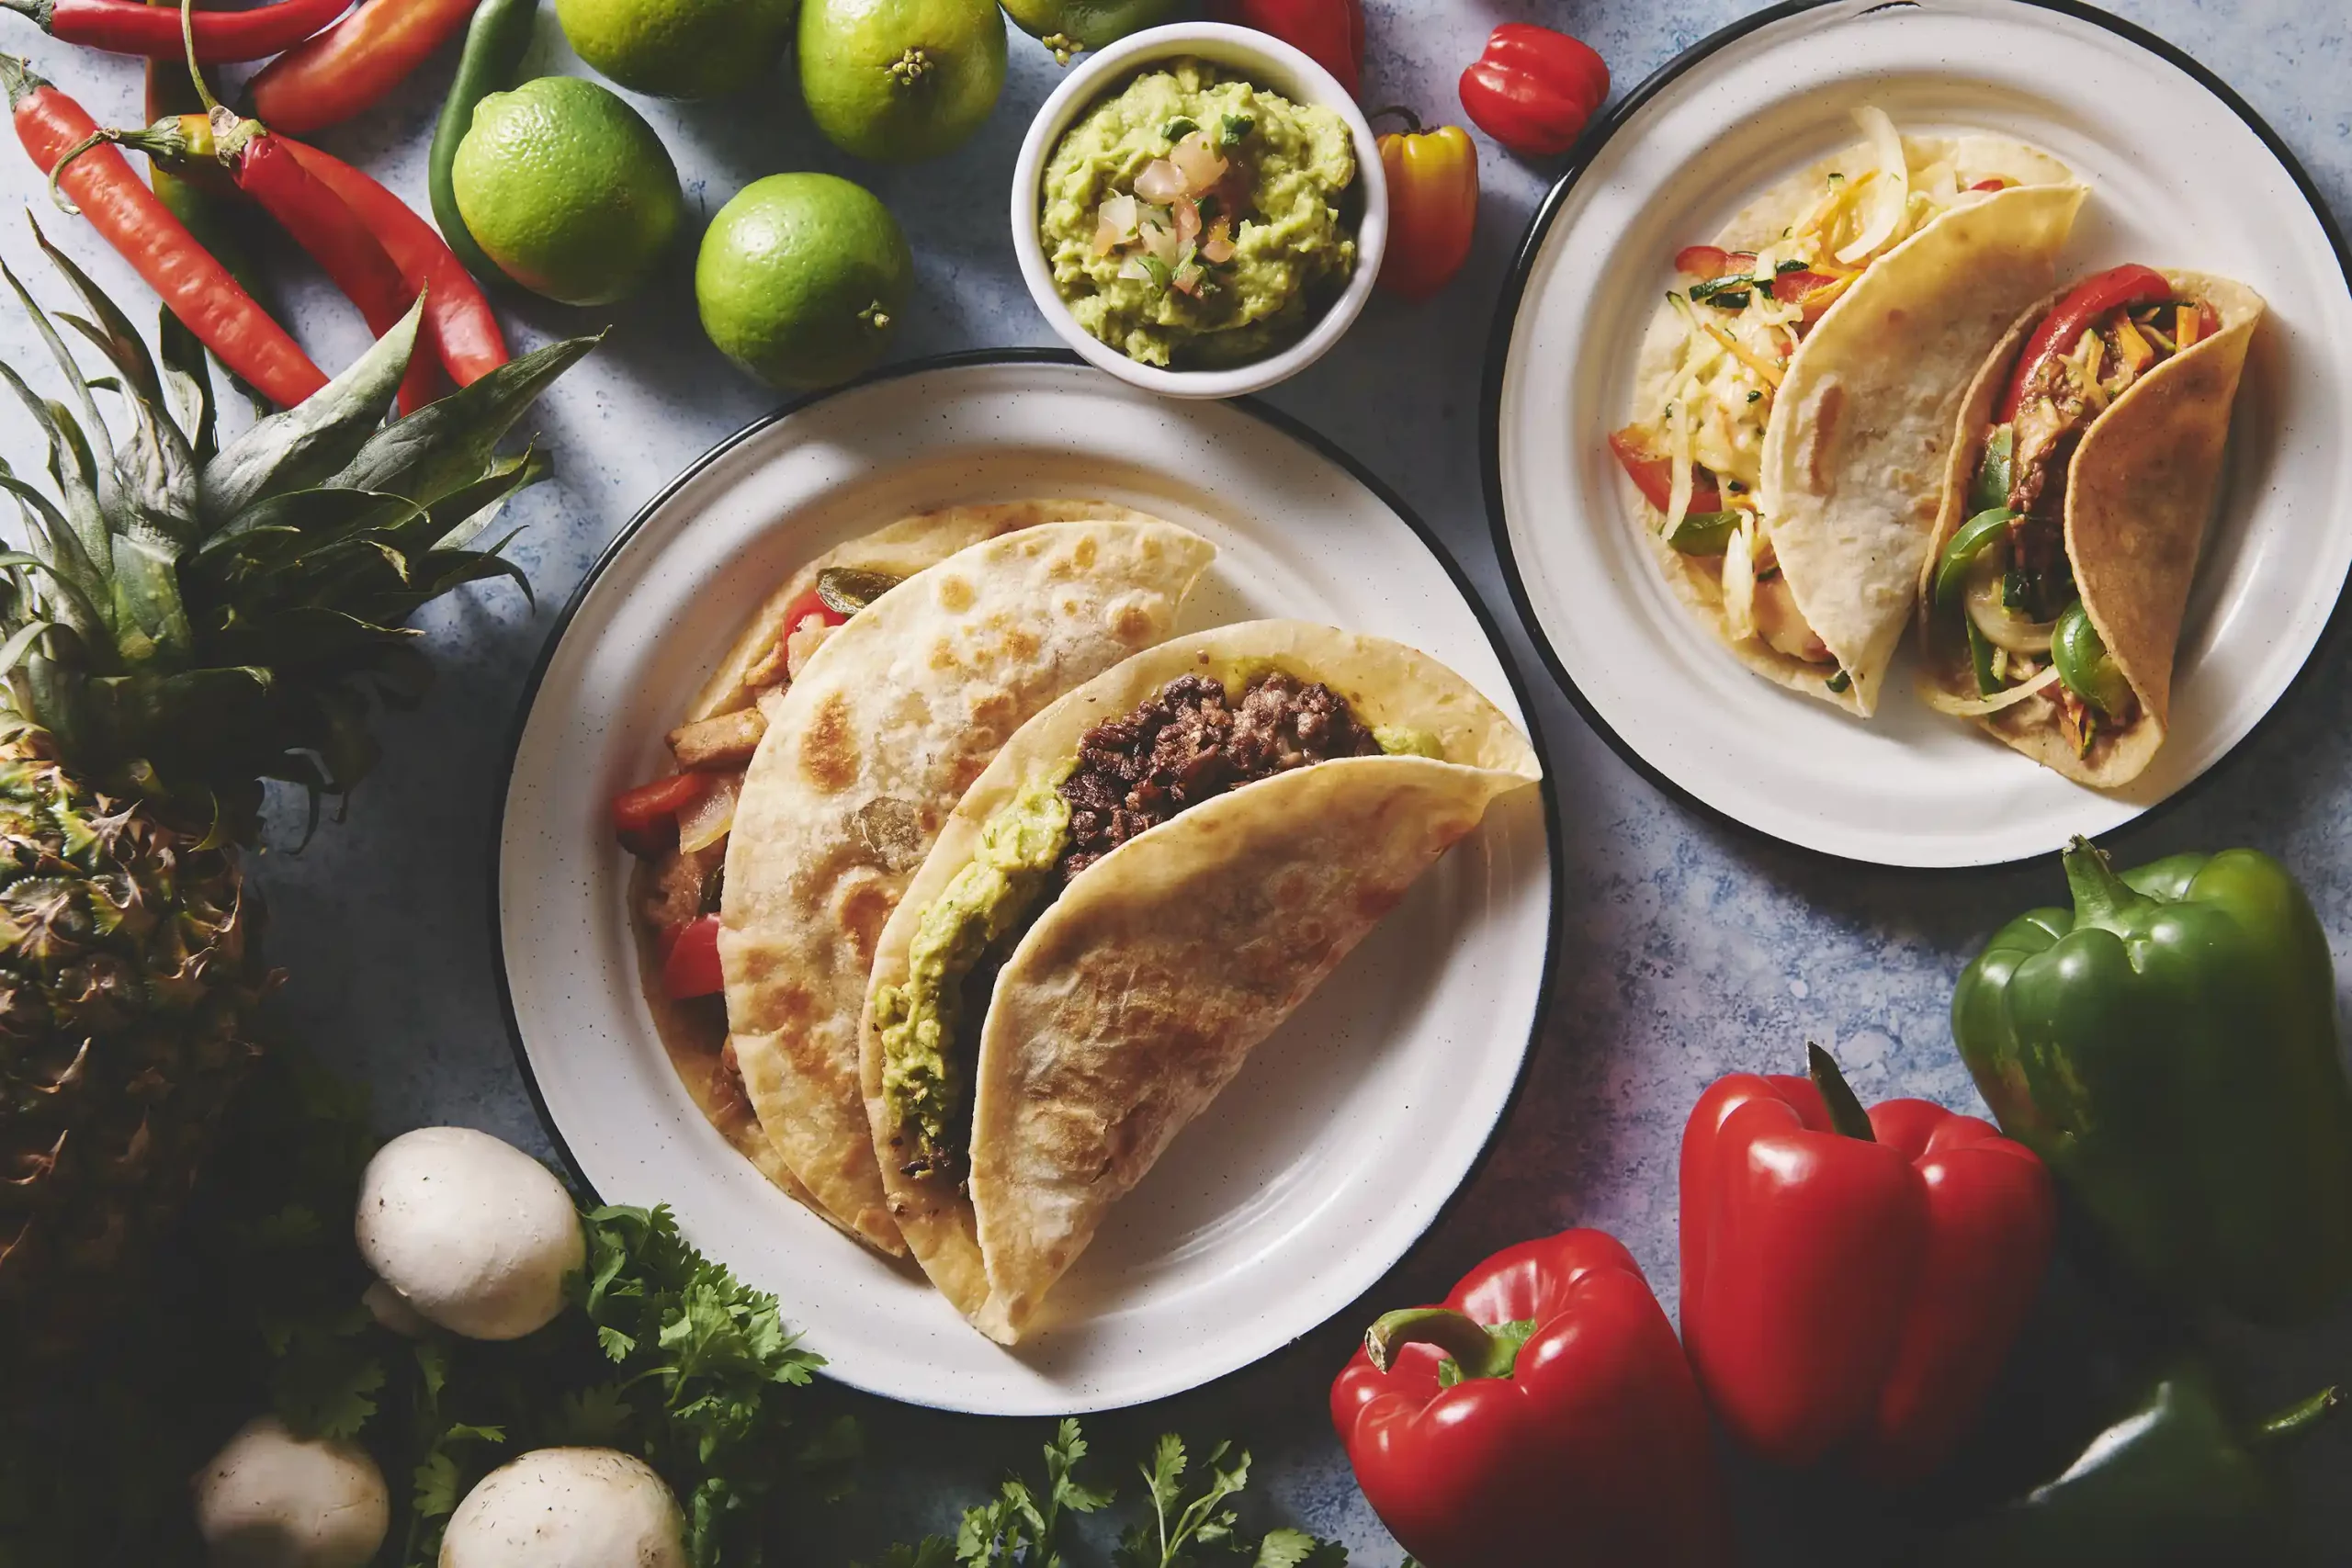 Our delicious Tacos Grandes, Quesadillas and sides.